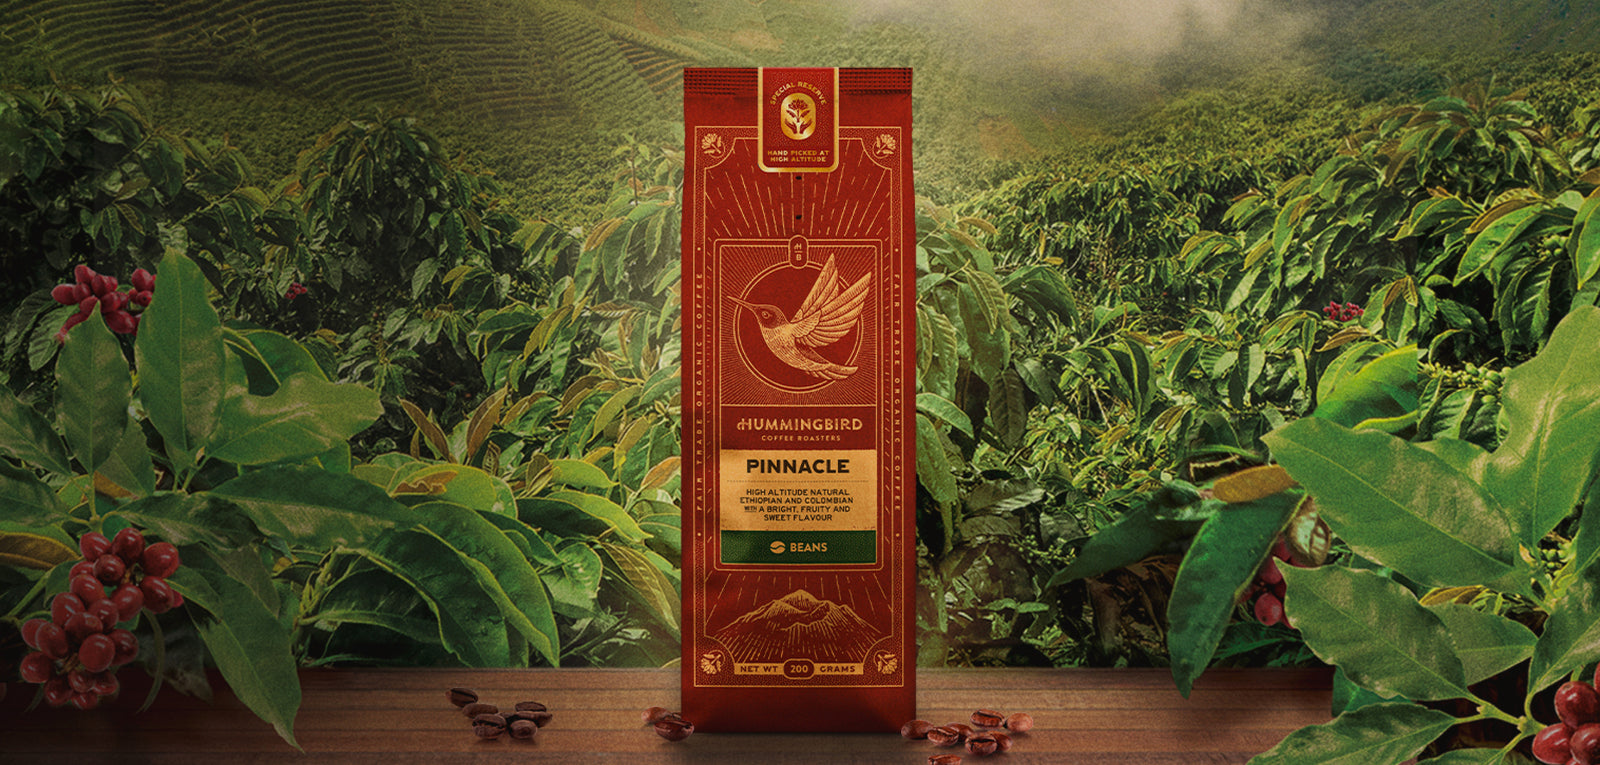 Package of Hummingbird Special Reserve coffee beans amidst coffee plants